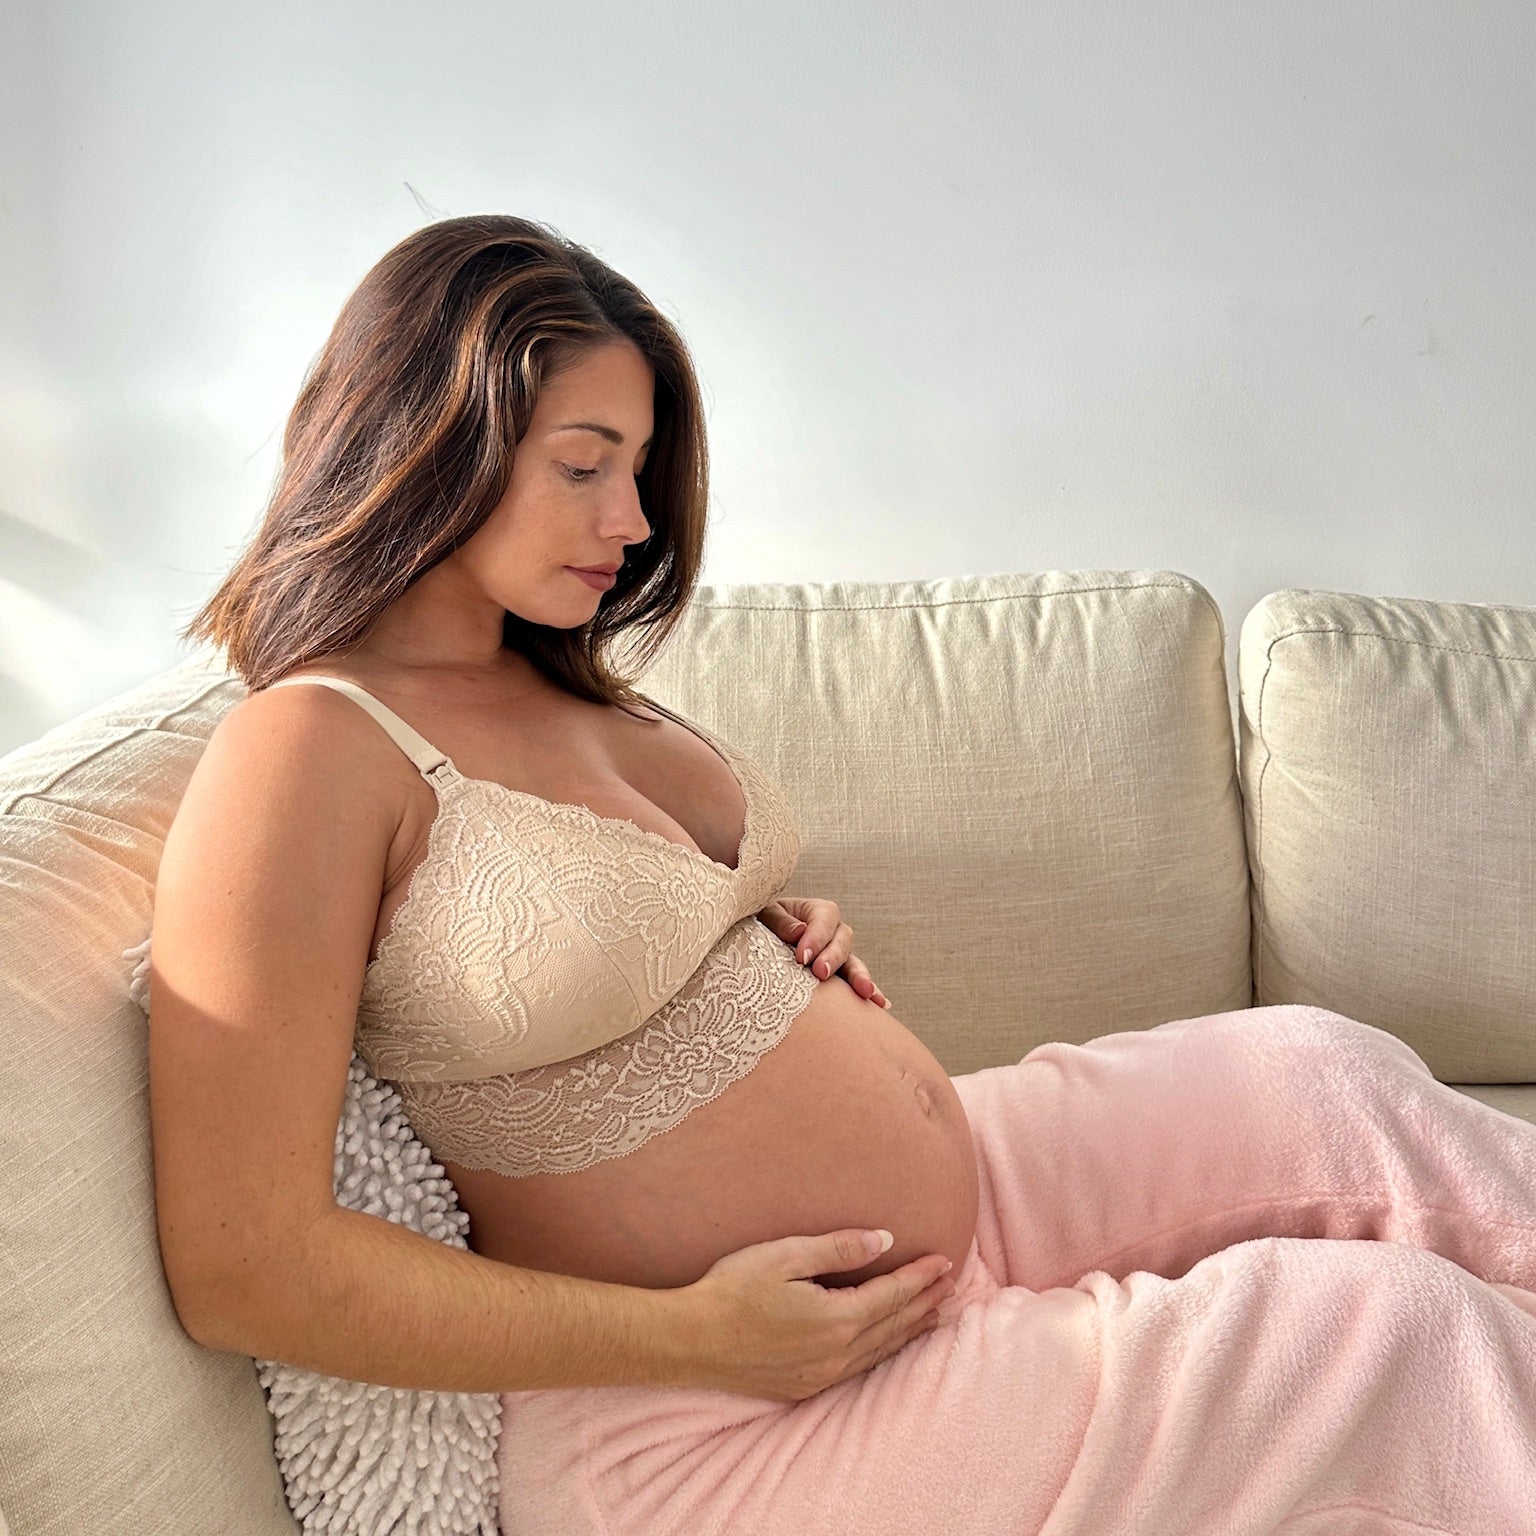 From Bump to Baby: 5 Reassuring Messages for New Mothers